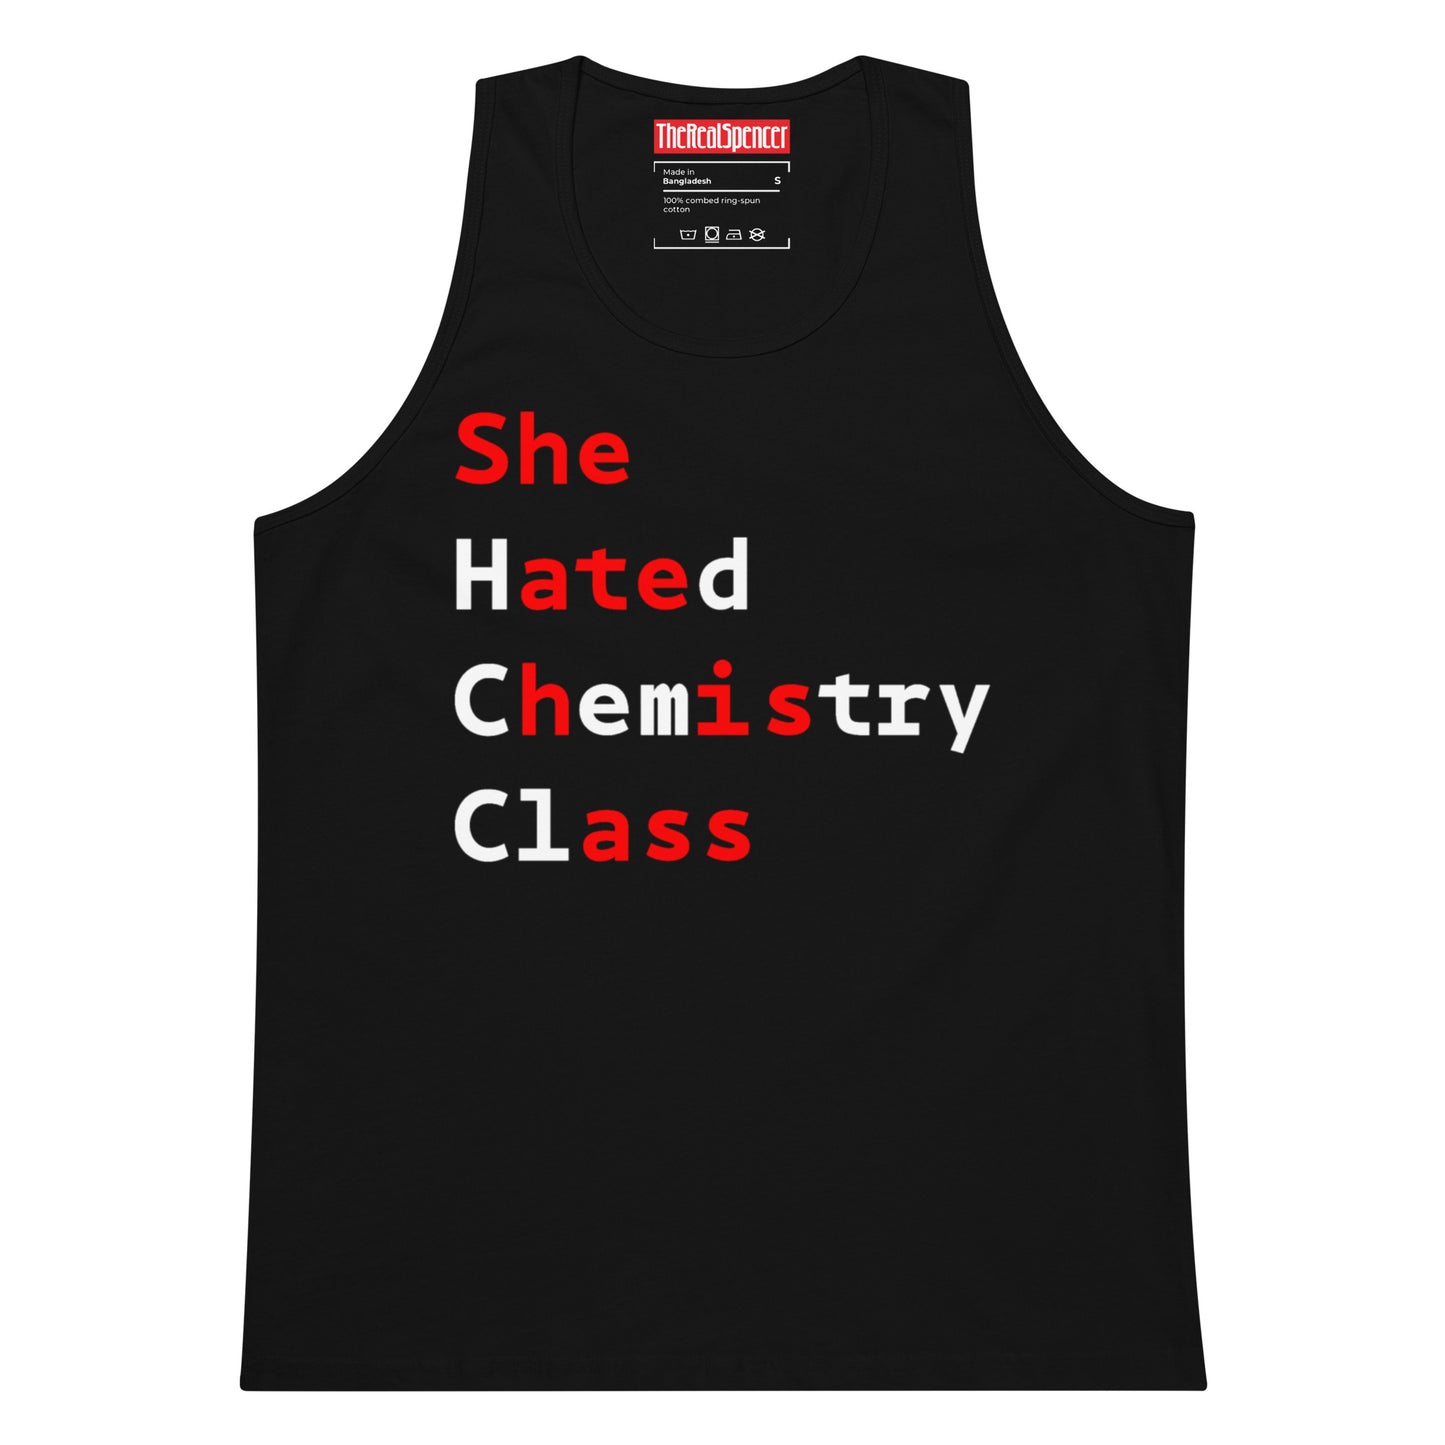 She Hated Chemistry Class Tank Top